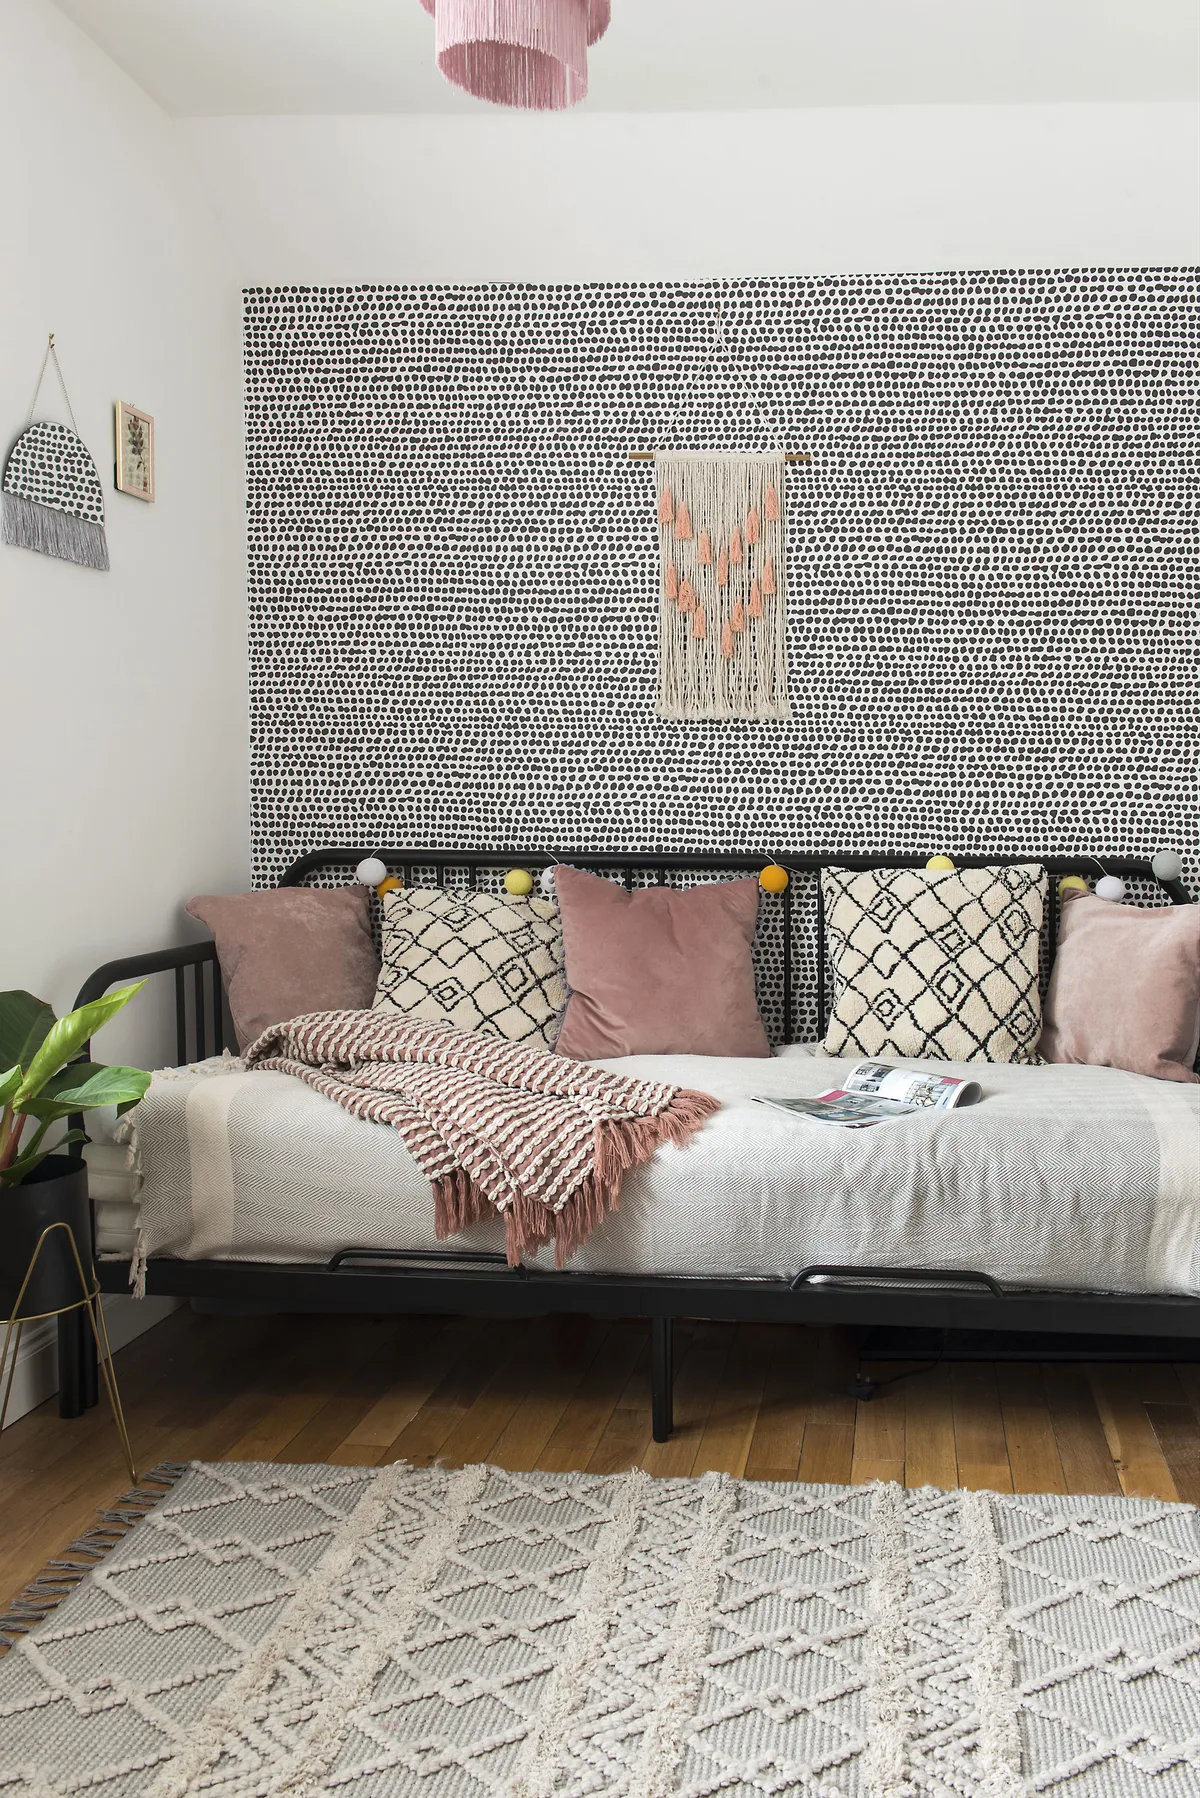 The third bedroom is used as a snug, with a daybed from IKEA and Berber cushions from Next. ‘I tried hand-painting a Dalmatian-print mural in this room, which went disastrously wrong,’ says Amy. ‘So, I bought this wallpaper from Graham & Brown instead!’